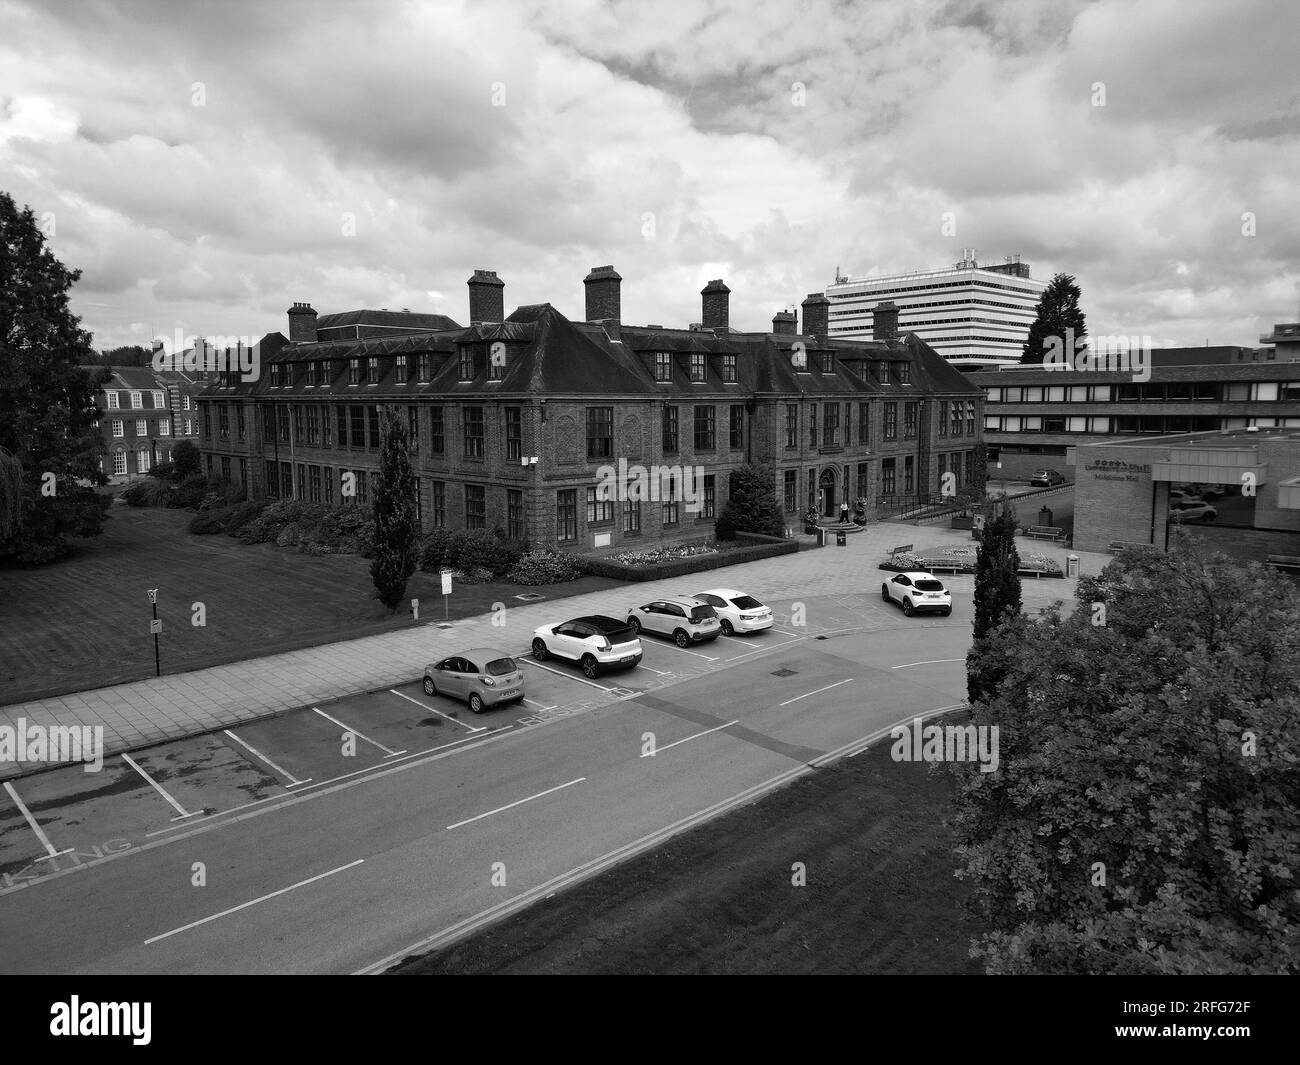 Aerial view of university of Hull Campus, Cottingham road, Kingston upon Hull Stock Photo